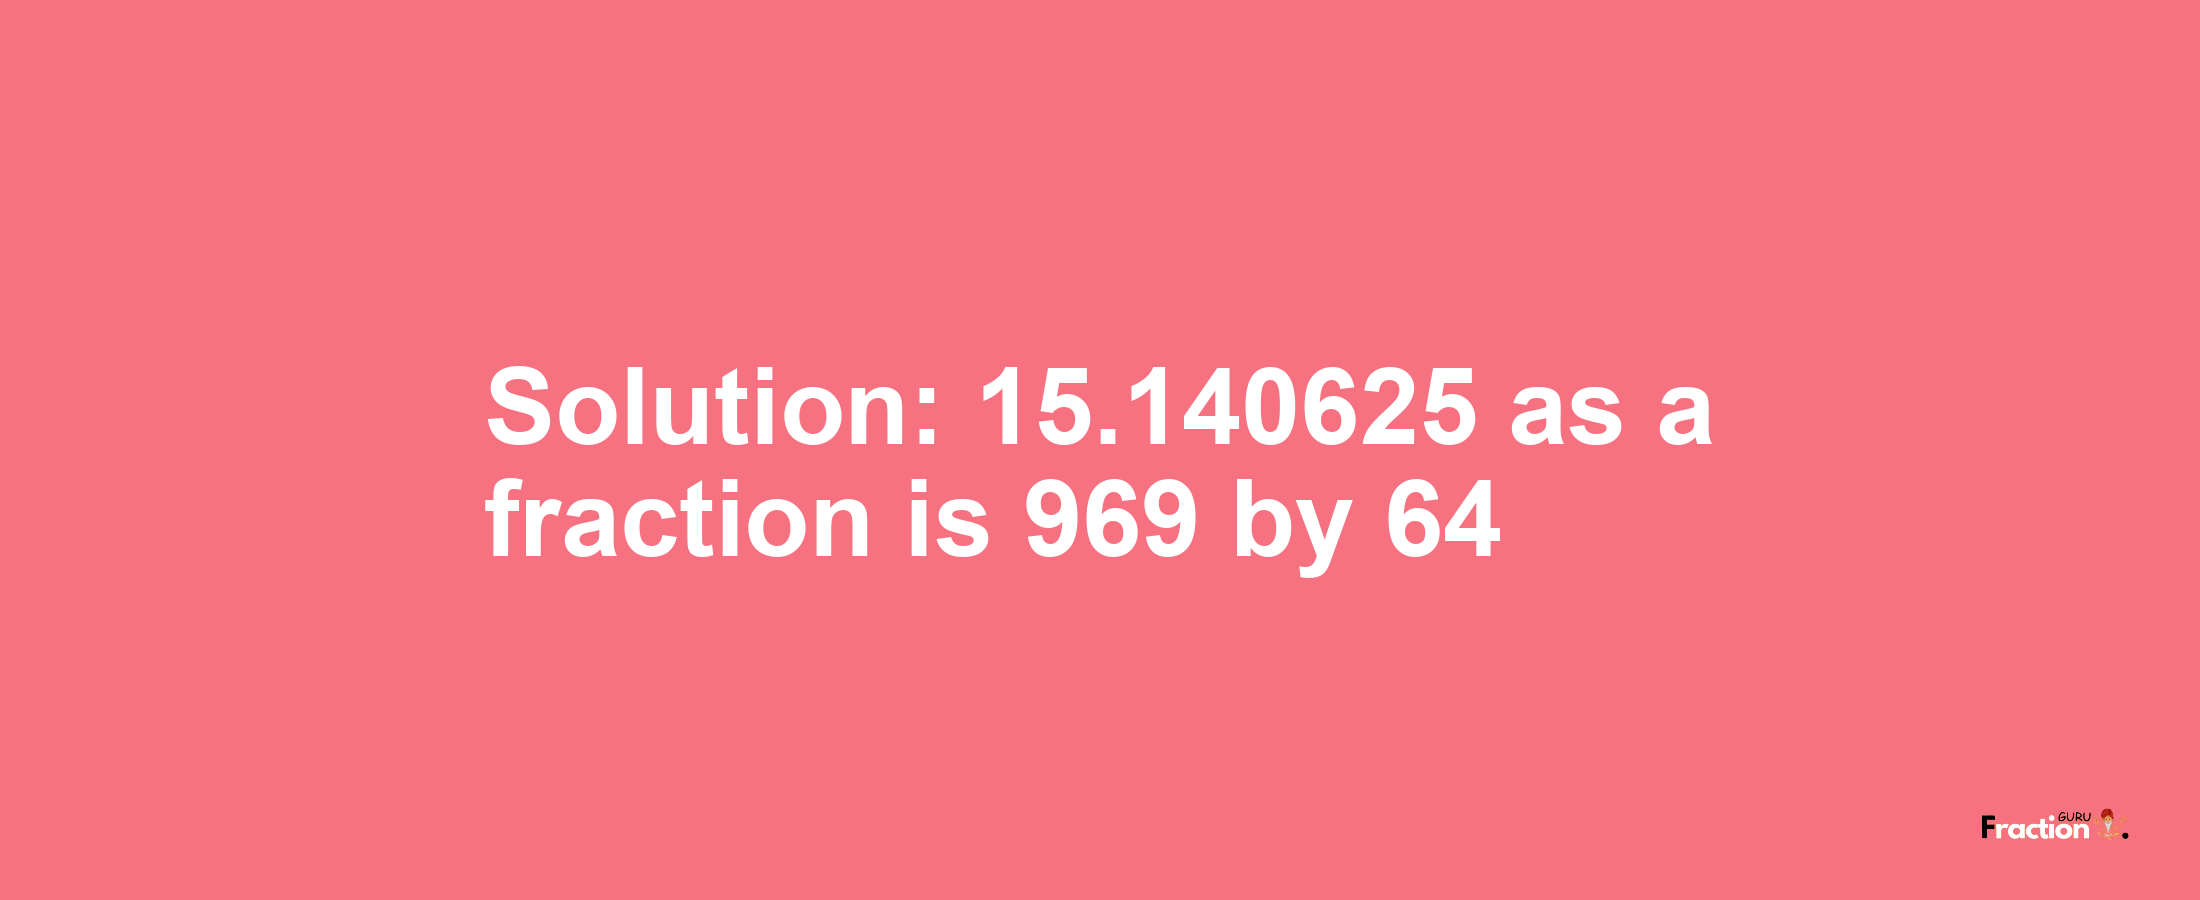 Solution:15.140625 as a fraction is 969/64